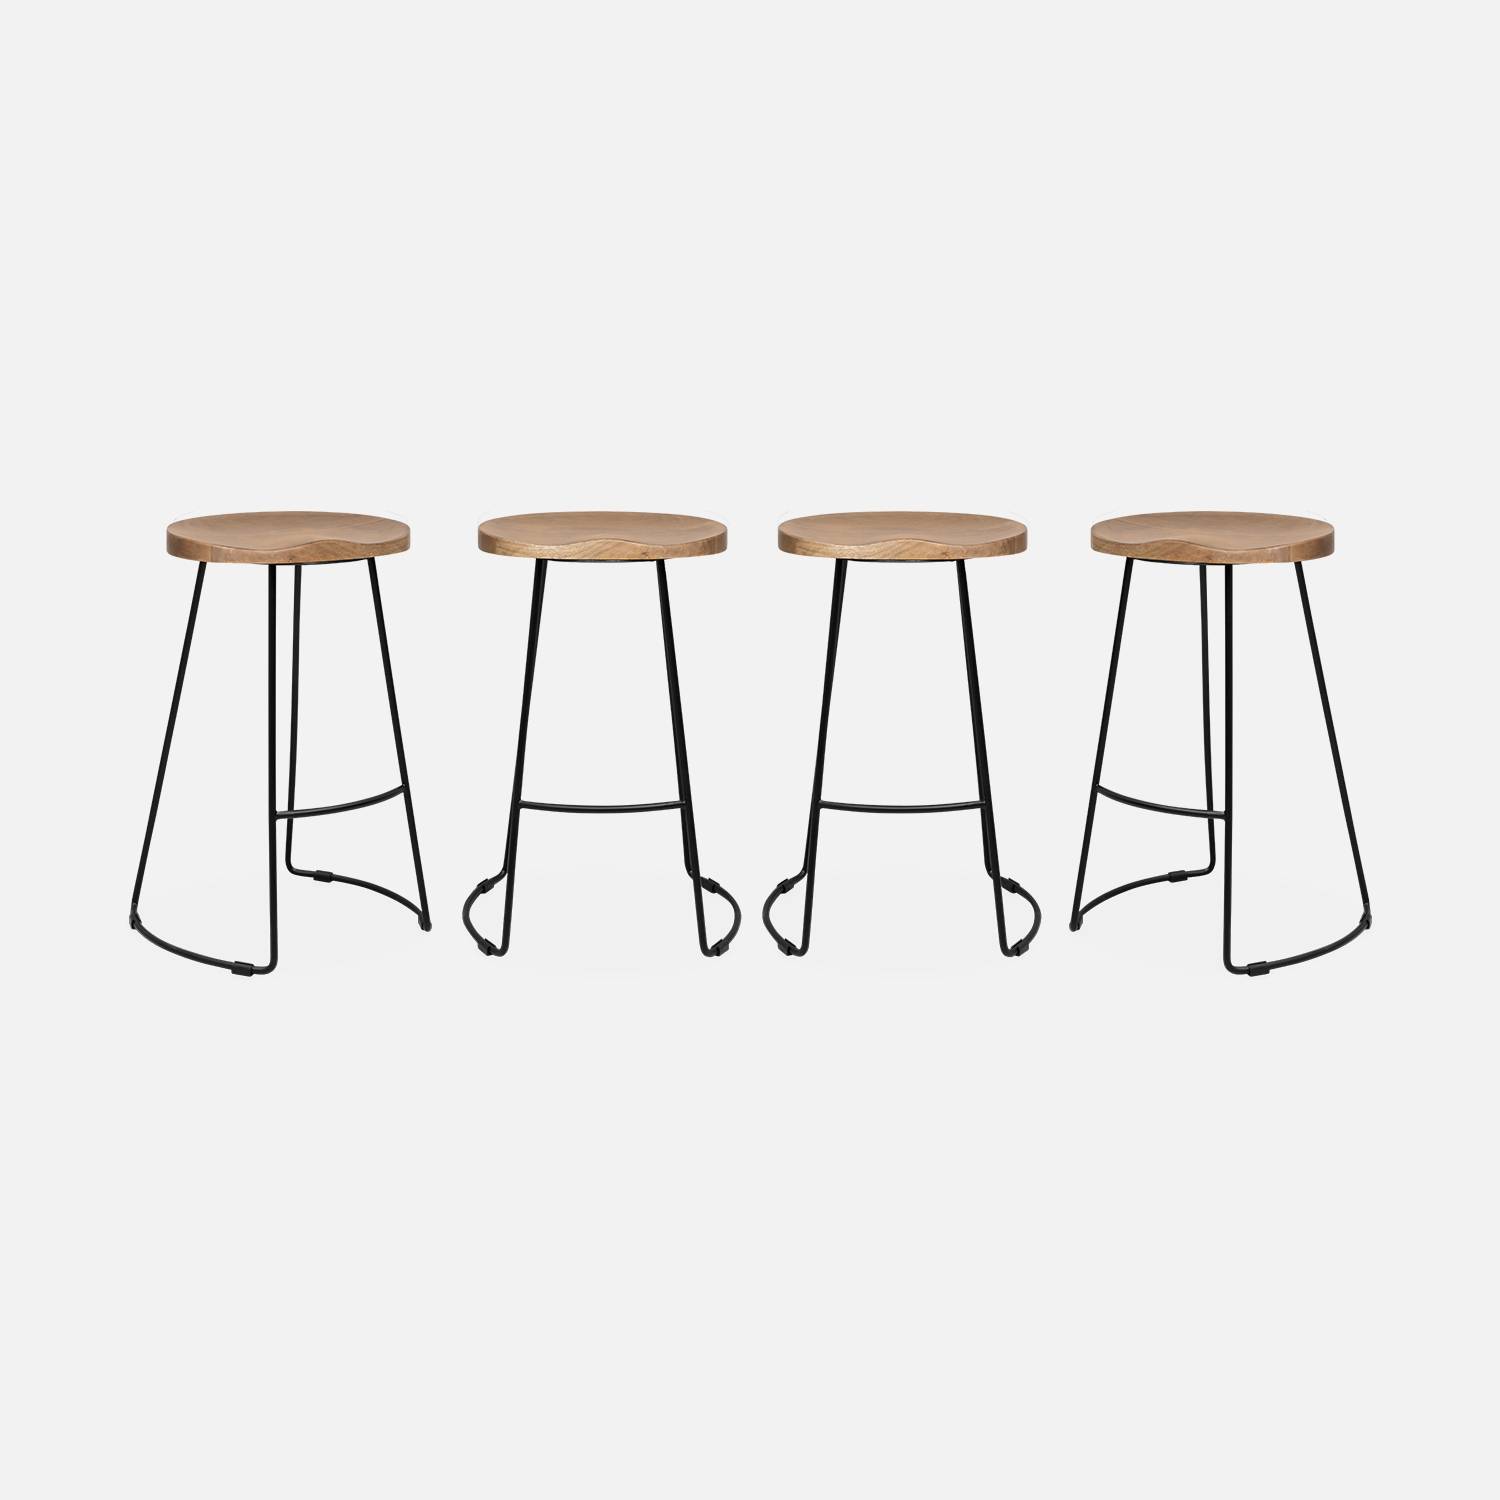 Set of 4 industrial metal and wooden bar stools, 44x36x65cm, Natural | sweeek